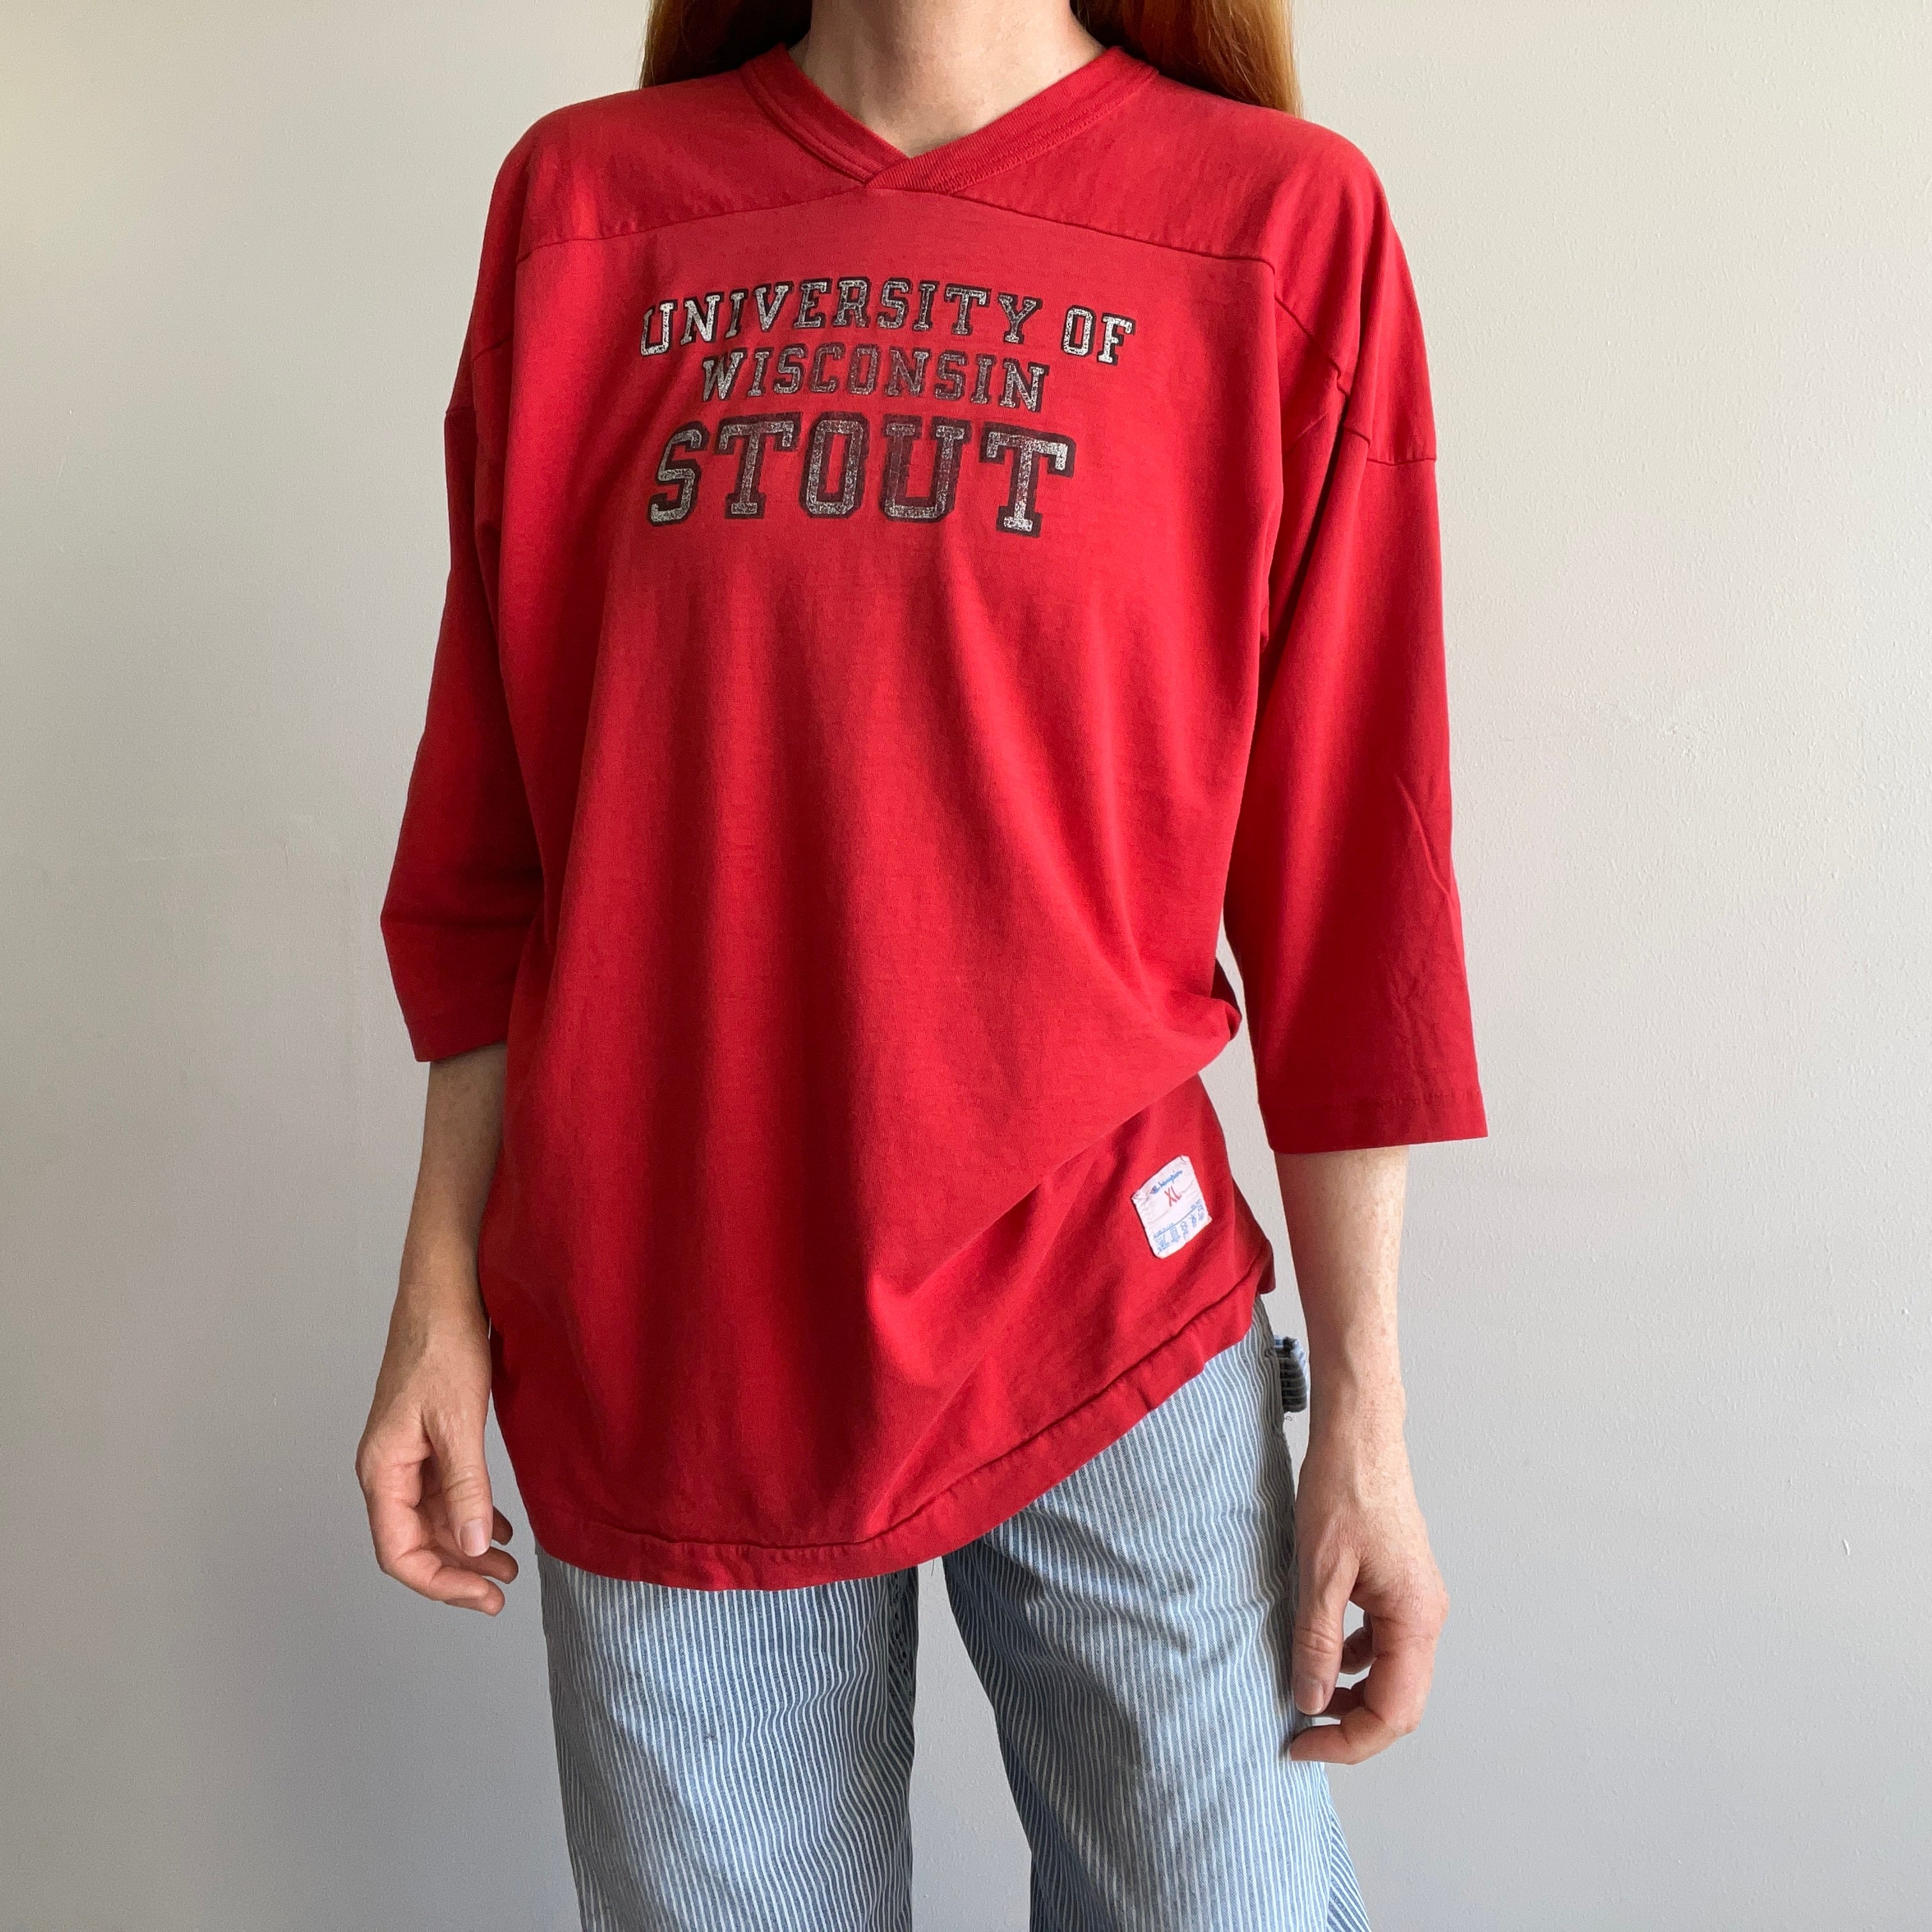 1970s Champion Brand University of Wisconsin Stout Super Soft Football –  Red Vintage Co